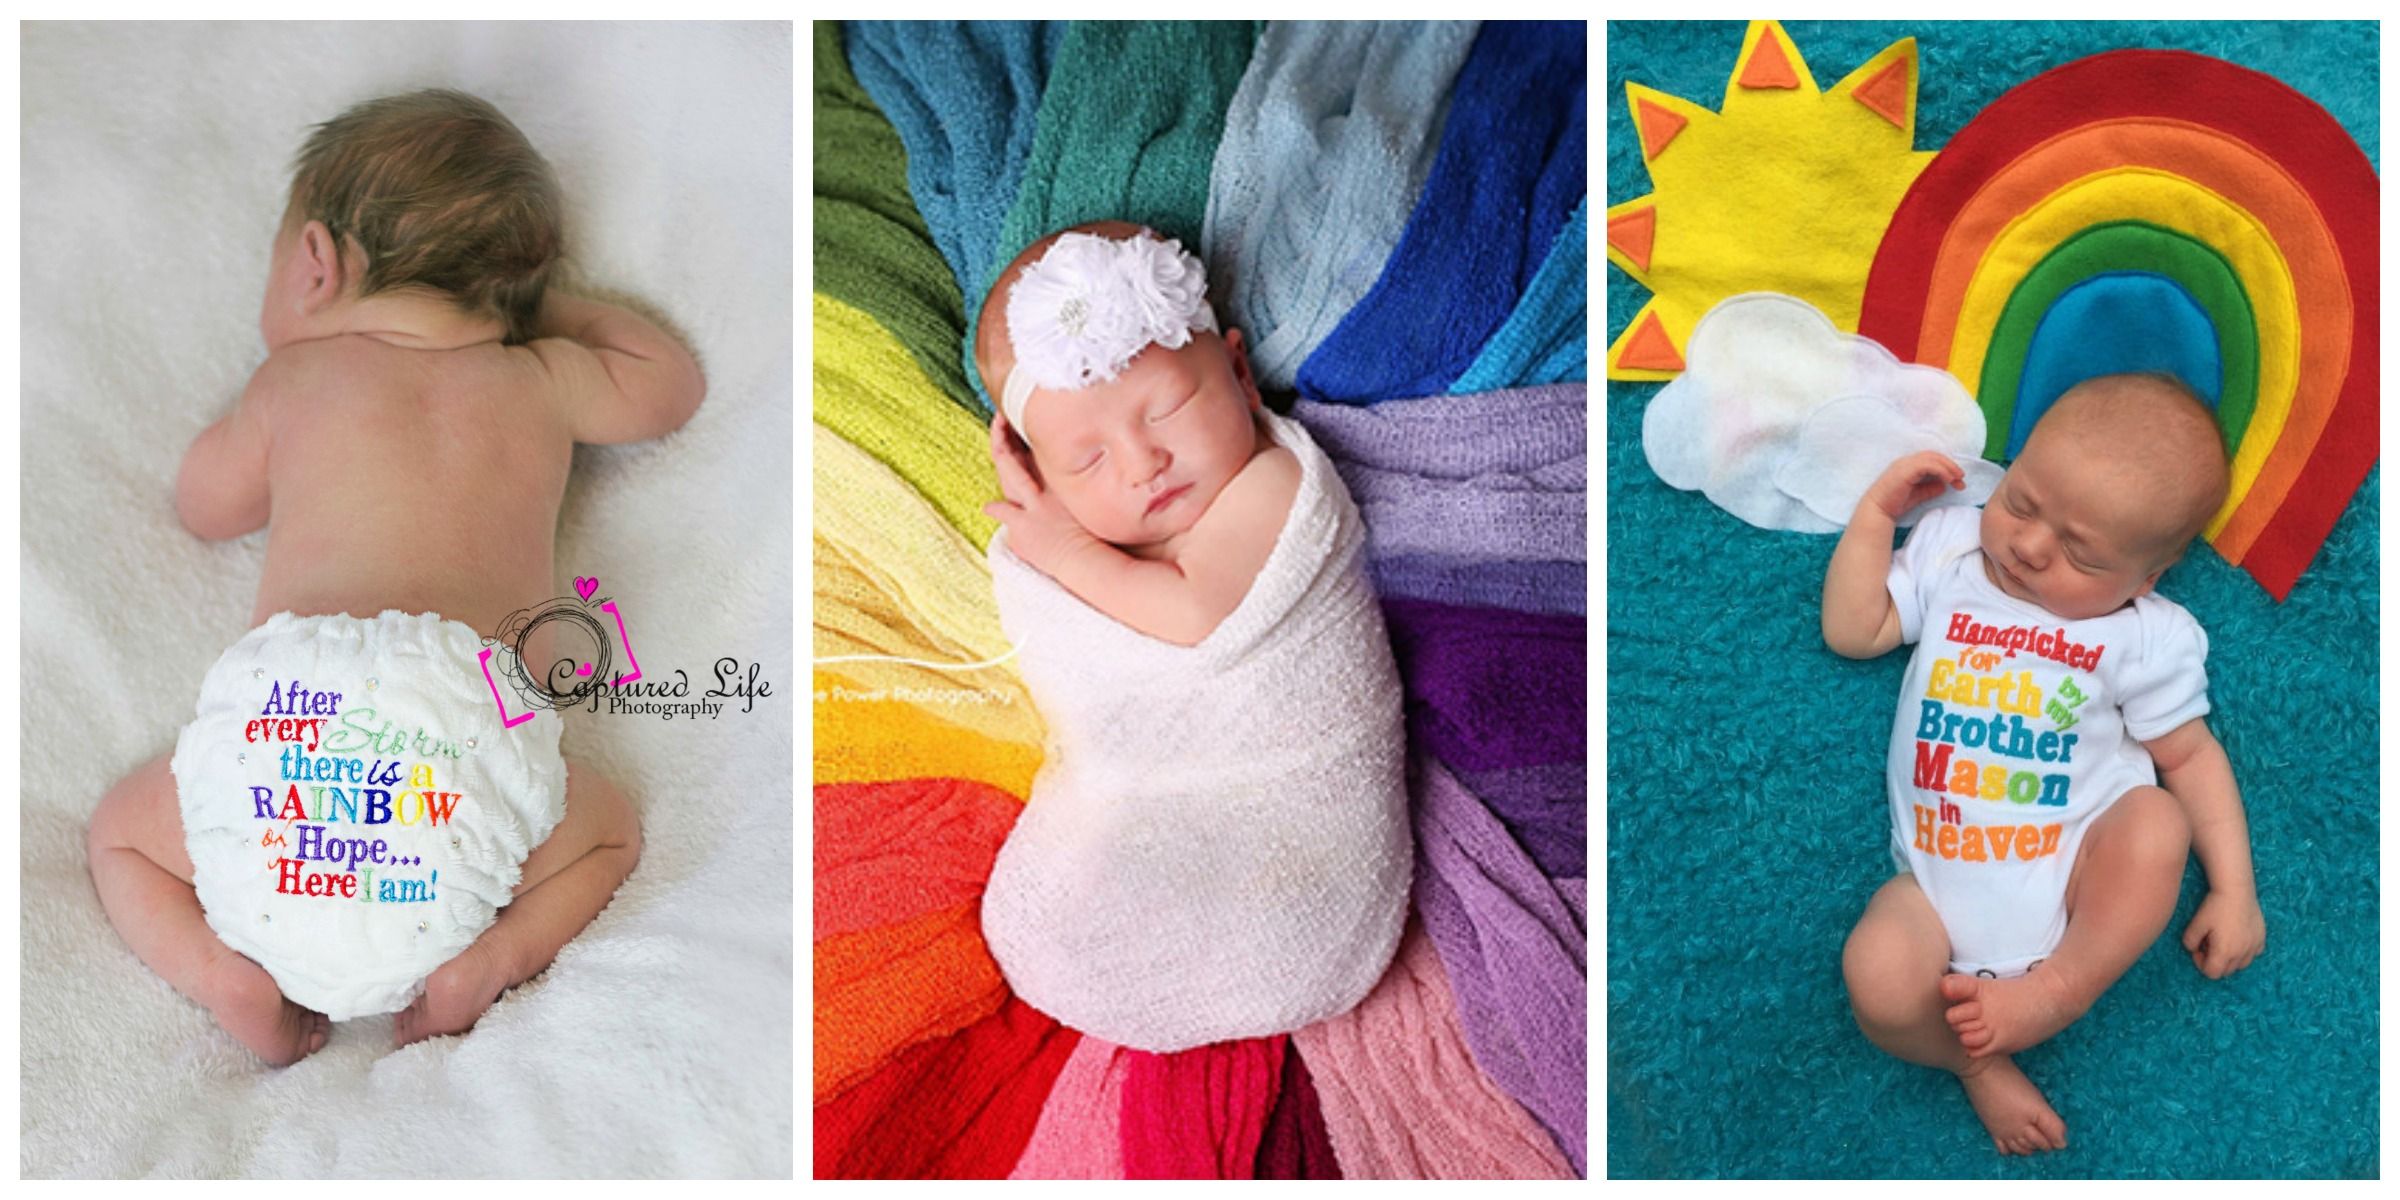 Woman has rainbow baby a year after son's death